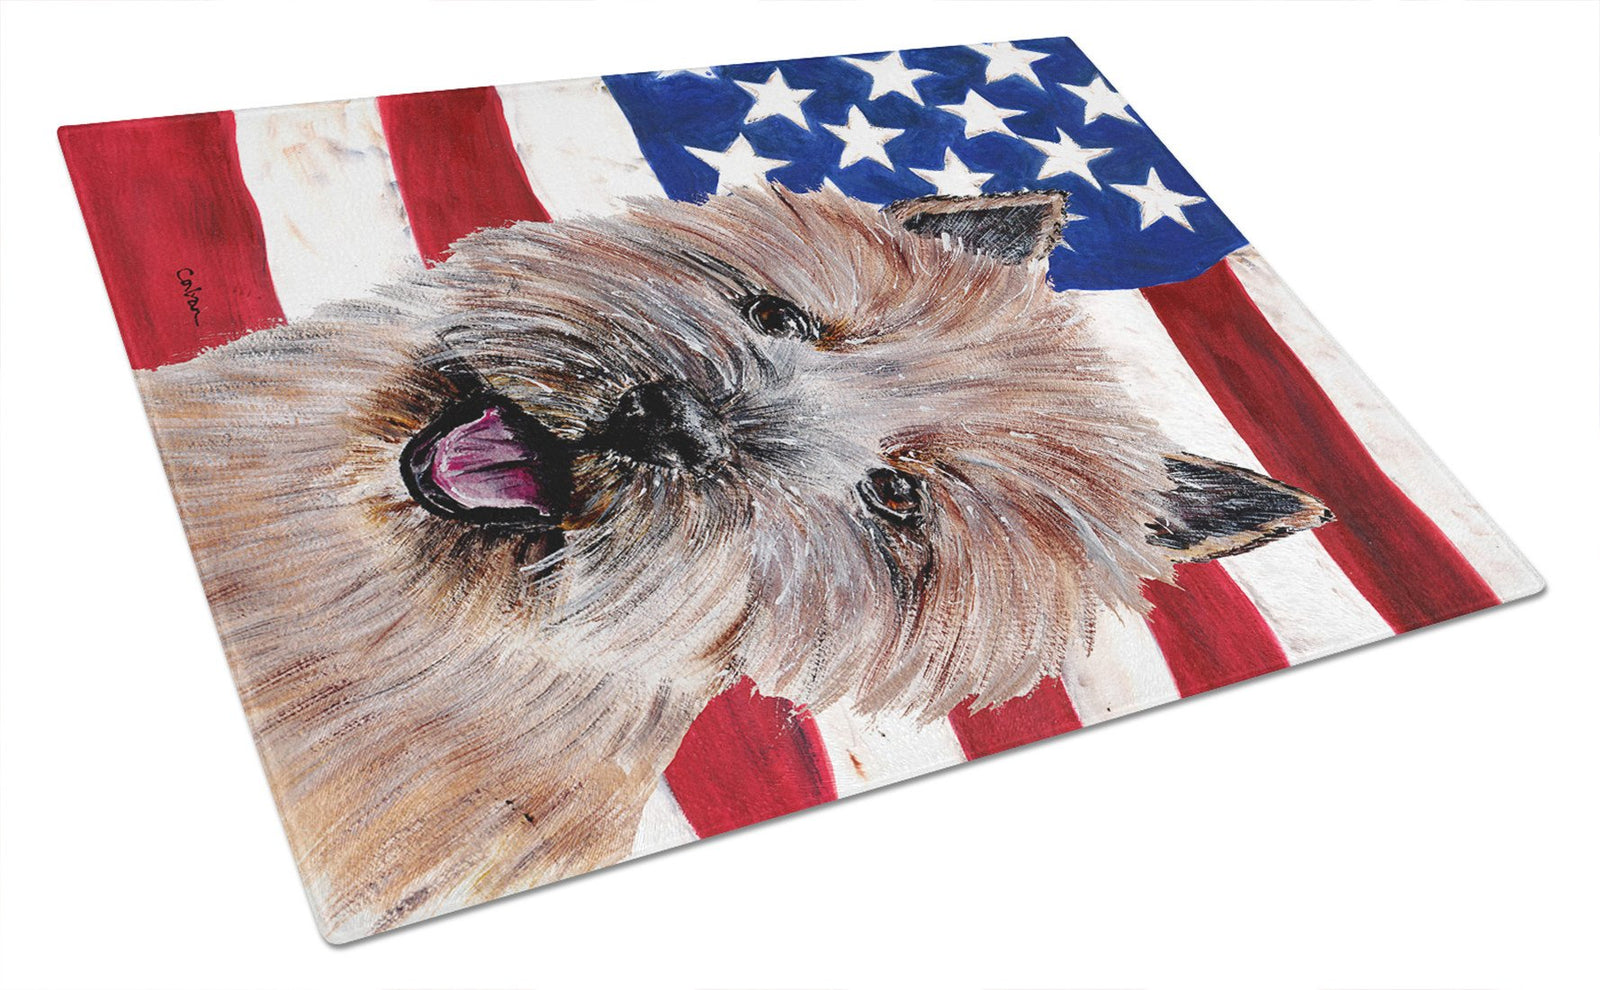 Norwich Terrier with American Flag USA Glass Cutting Board Large Size SC9638LCB by Caroline's Treasures